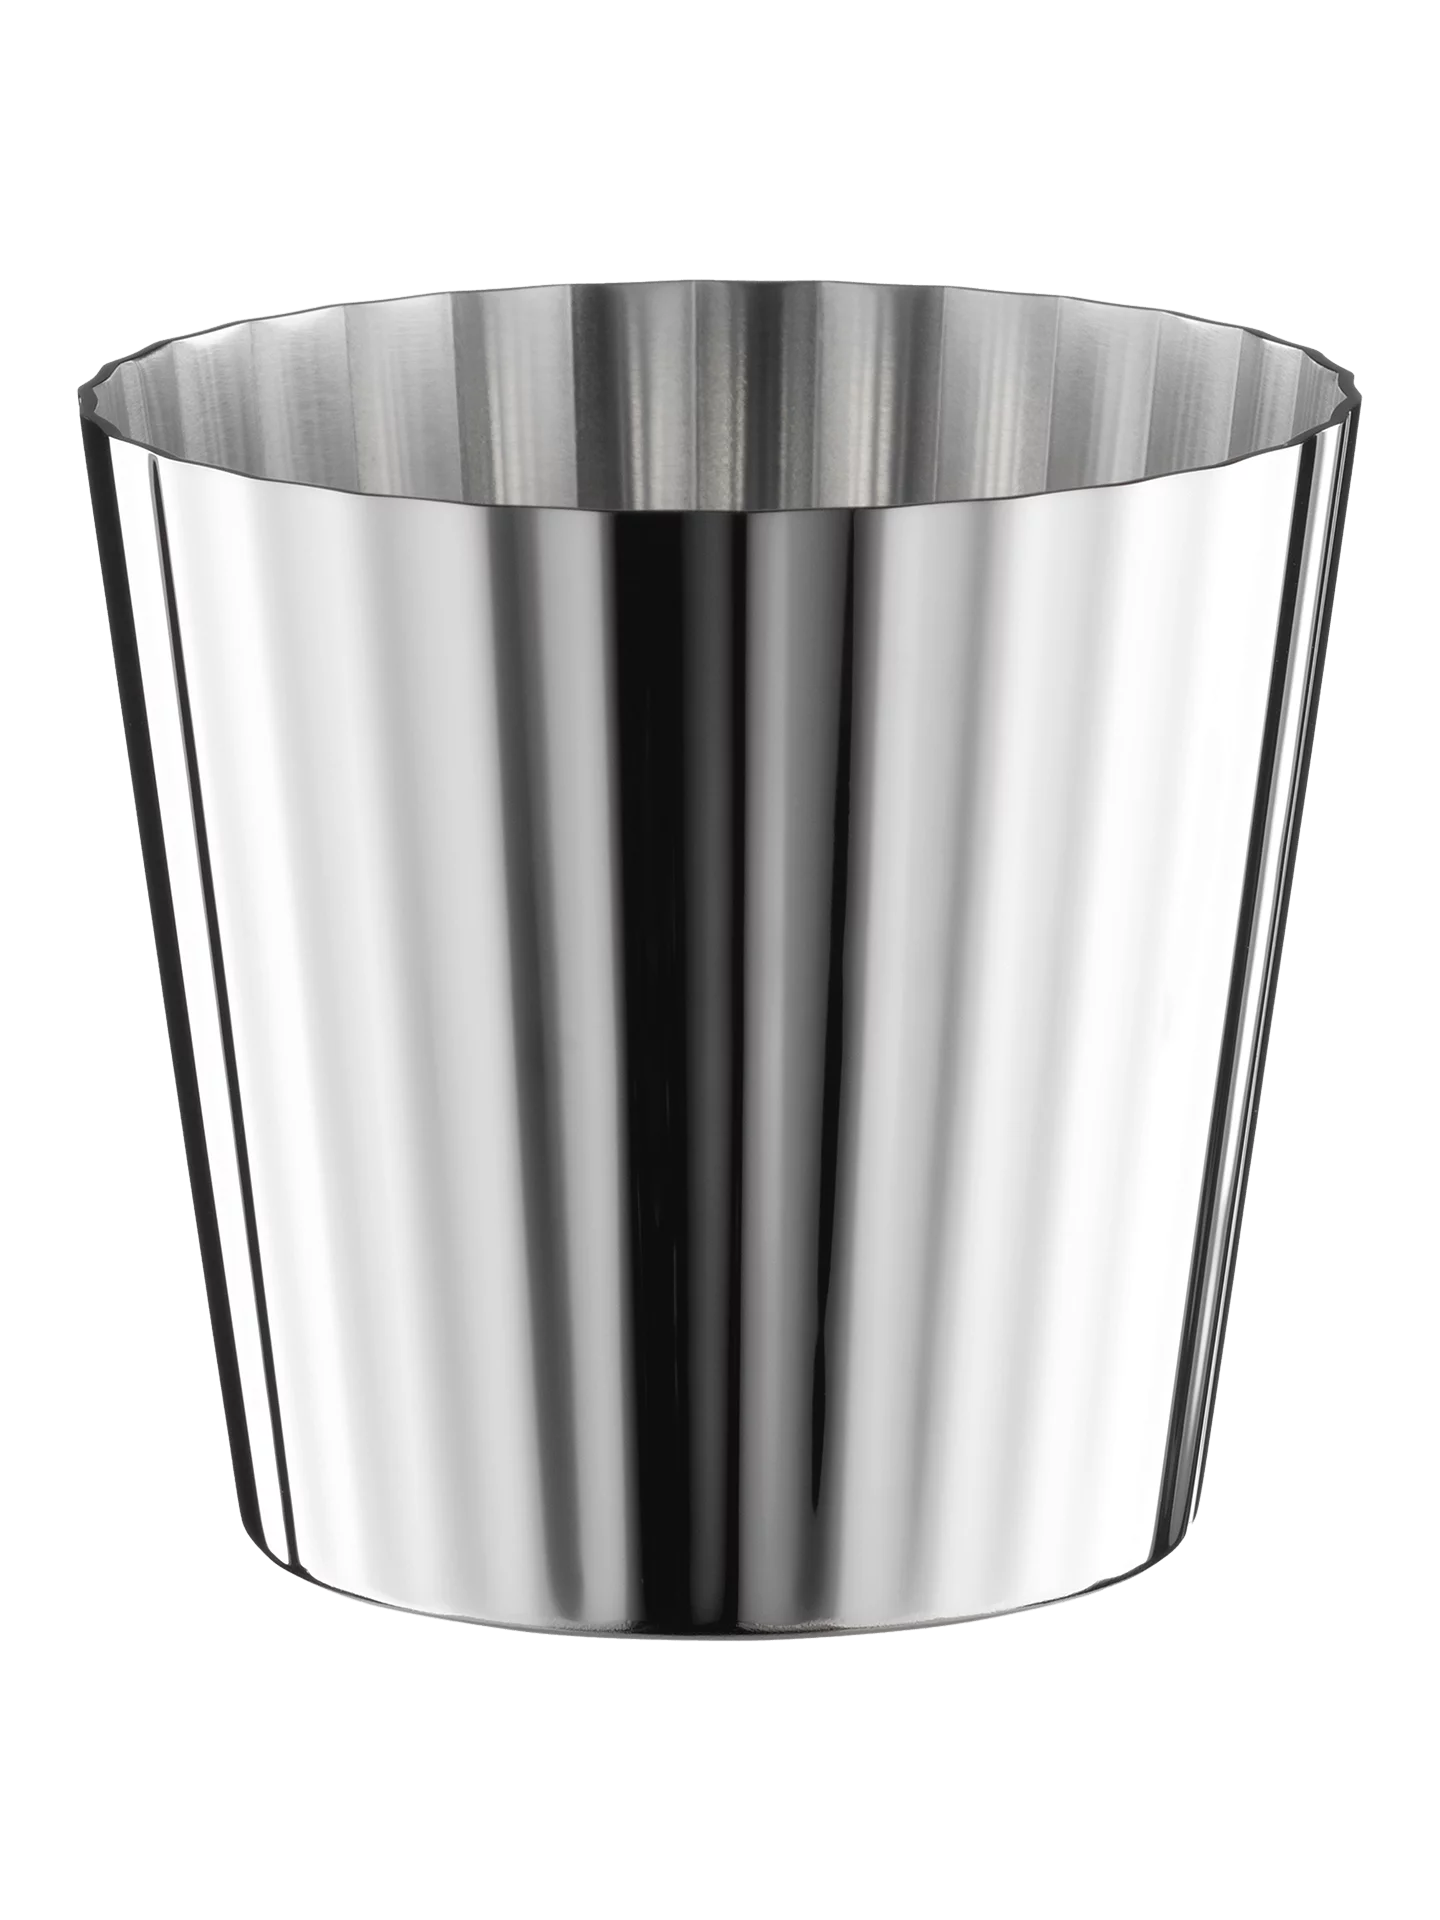 Belvedere Rum and distillate tumbler (90g silverplated)